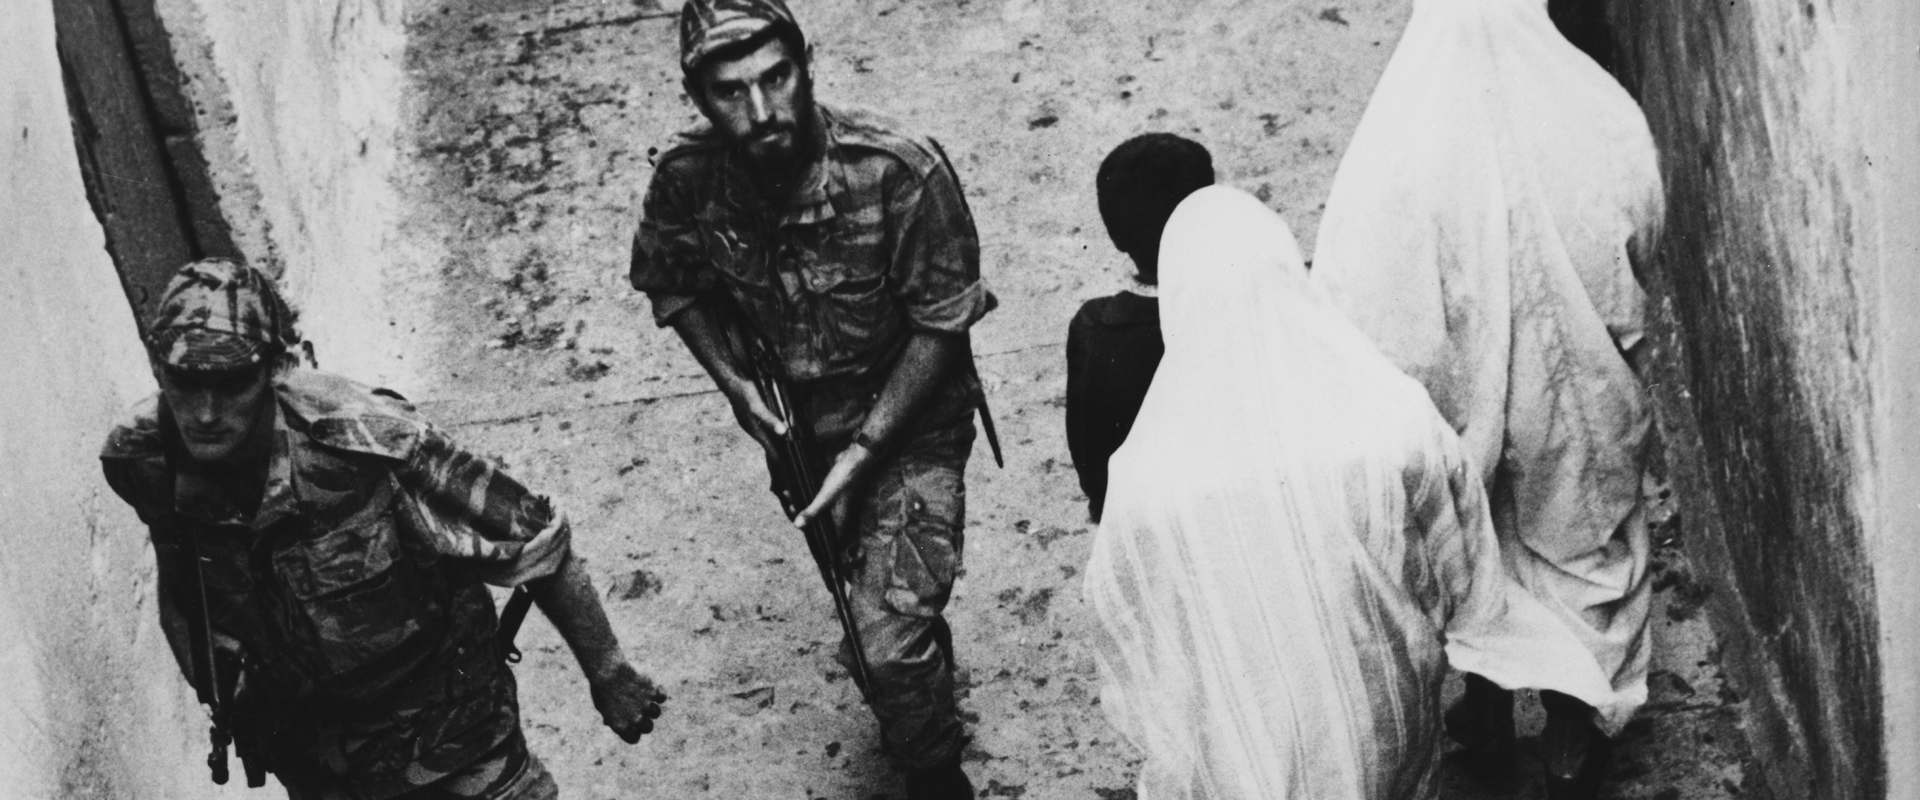 The Battle of Algiers background 2